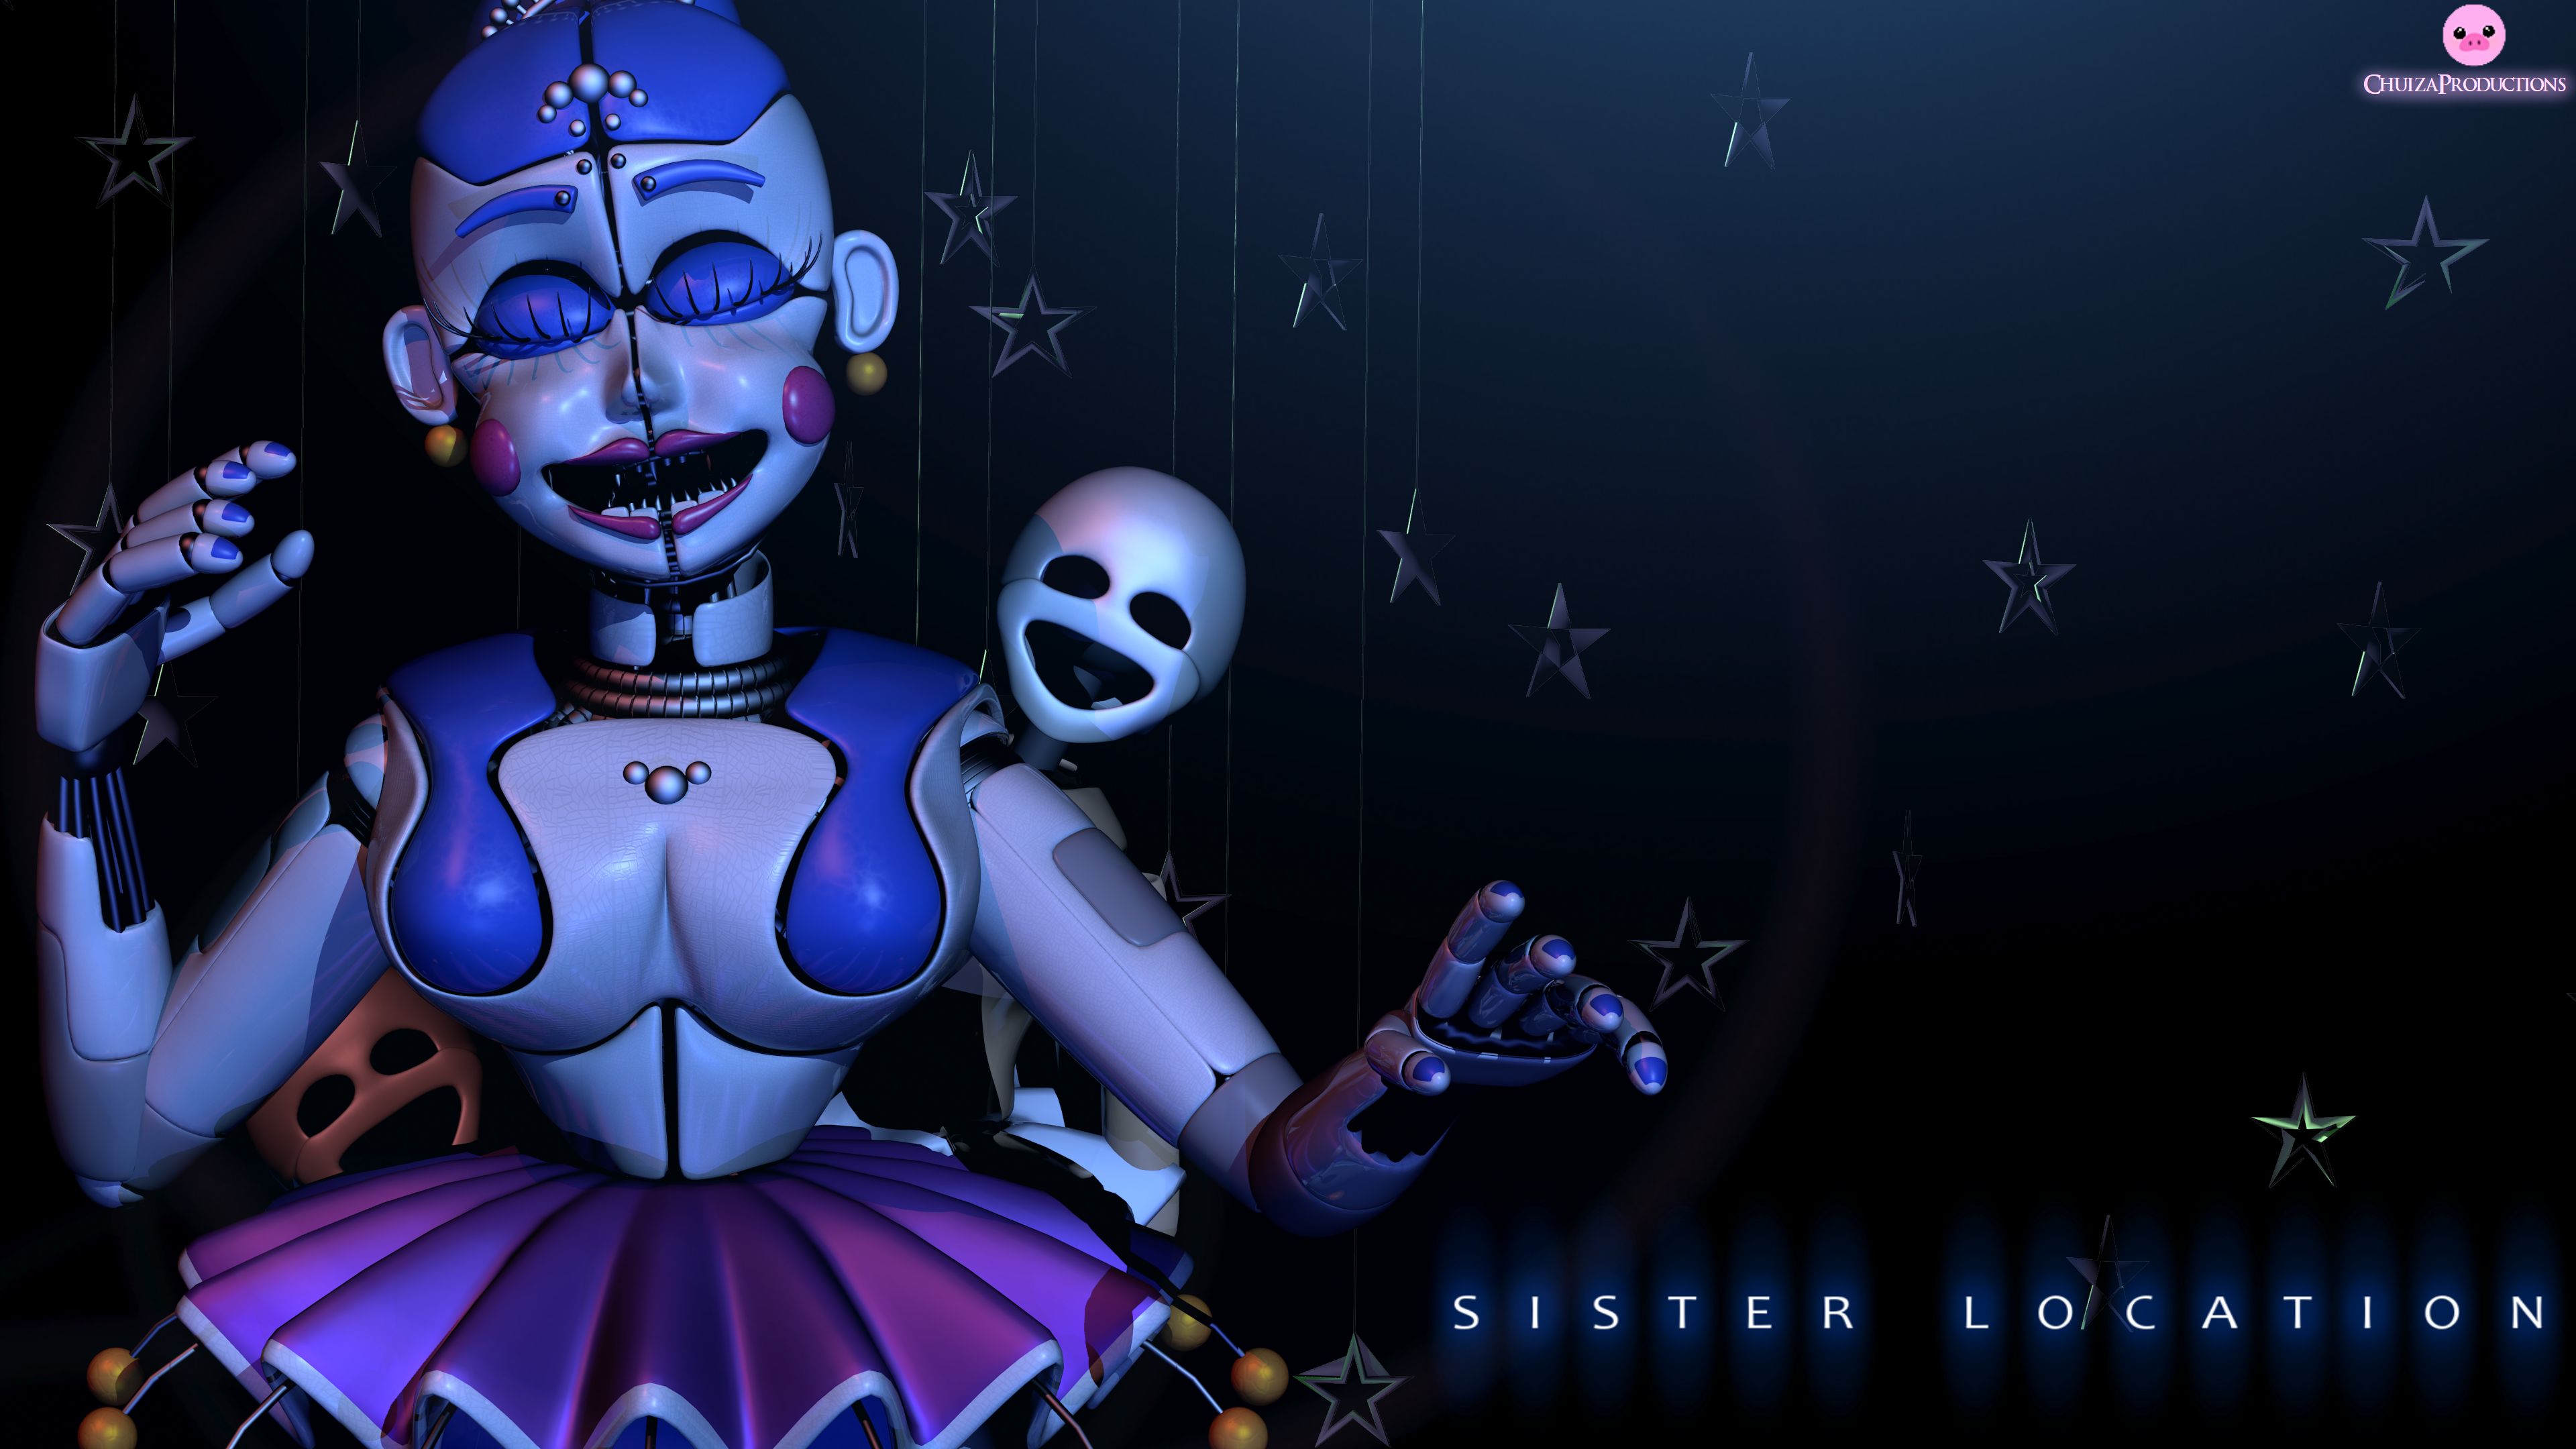 Five Nights At Freddy's: Sister Location wallpapers for desktop, download  free Five Nights At Freddy's: Sister Location pictures and backgrounds for  PC 